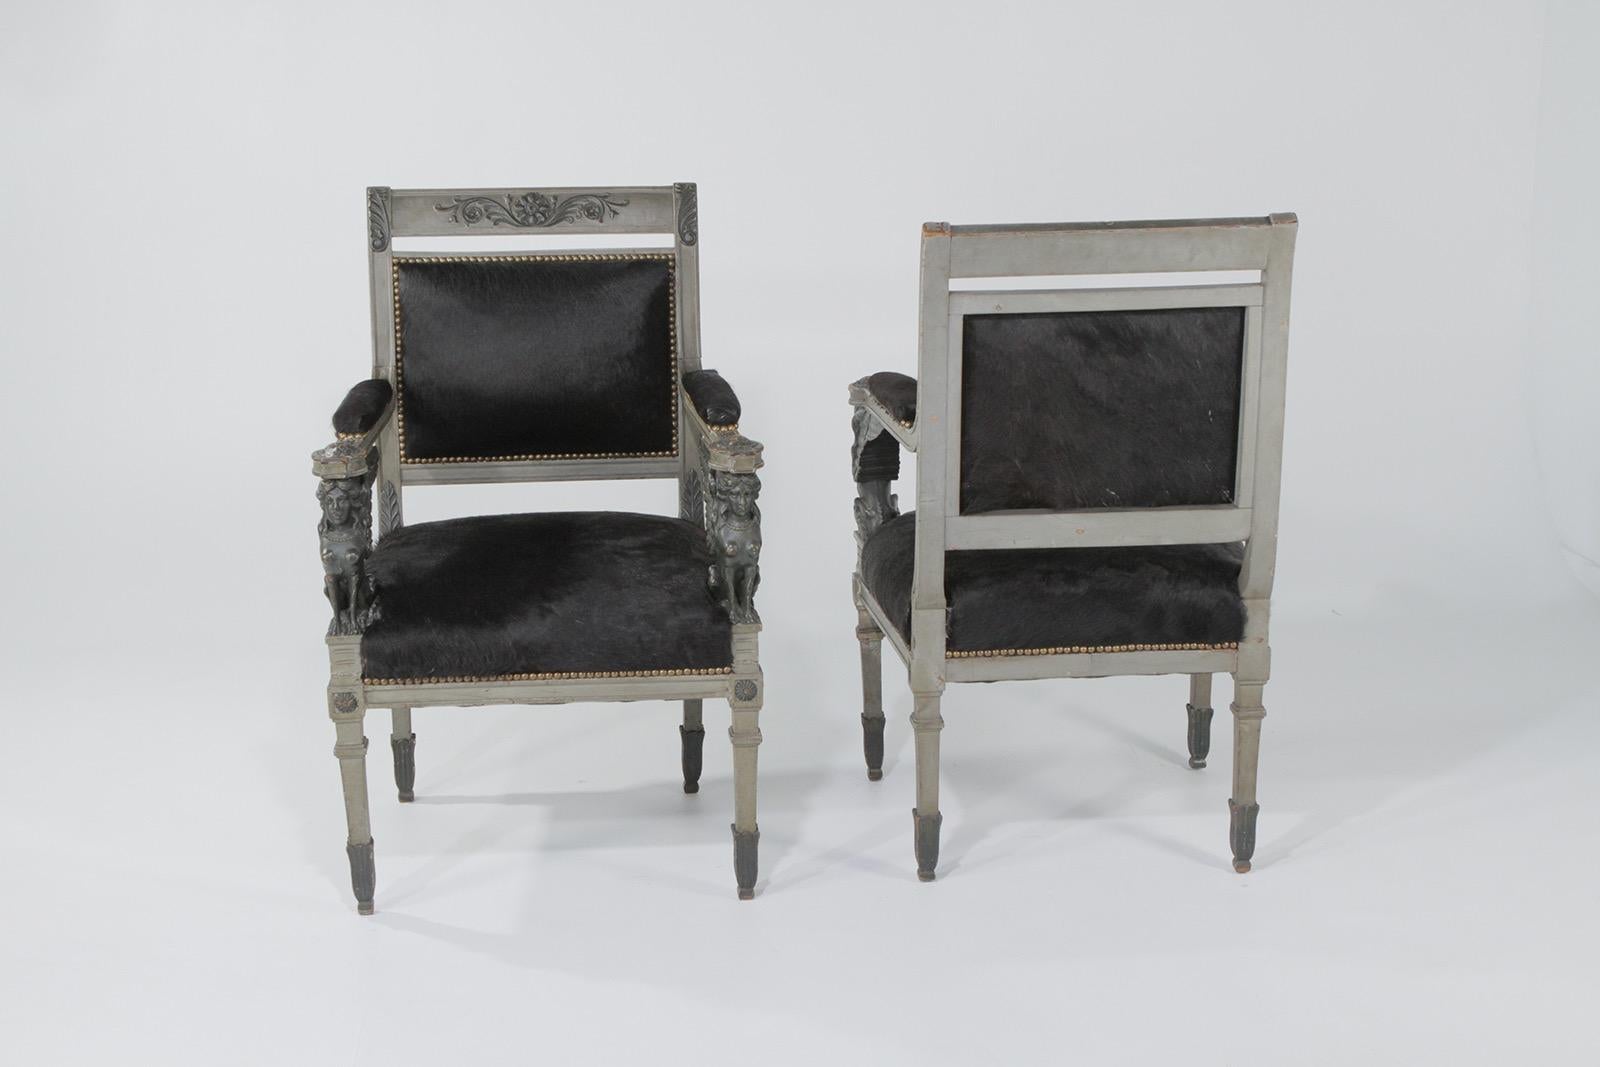 Truly amazing ornately carved wood Egyptian Revival armchairs having a gilded underpaint with grey wash paint, glamorous details including rosettes and female sphinx figures on the arms, and glamorously contemporized with black cowhide upholstery.